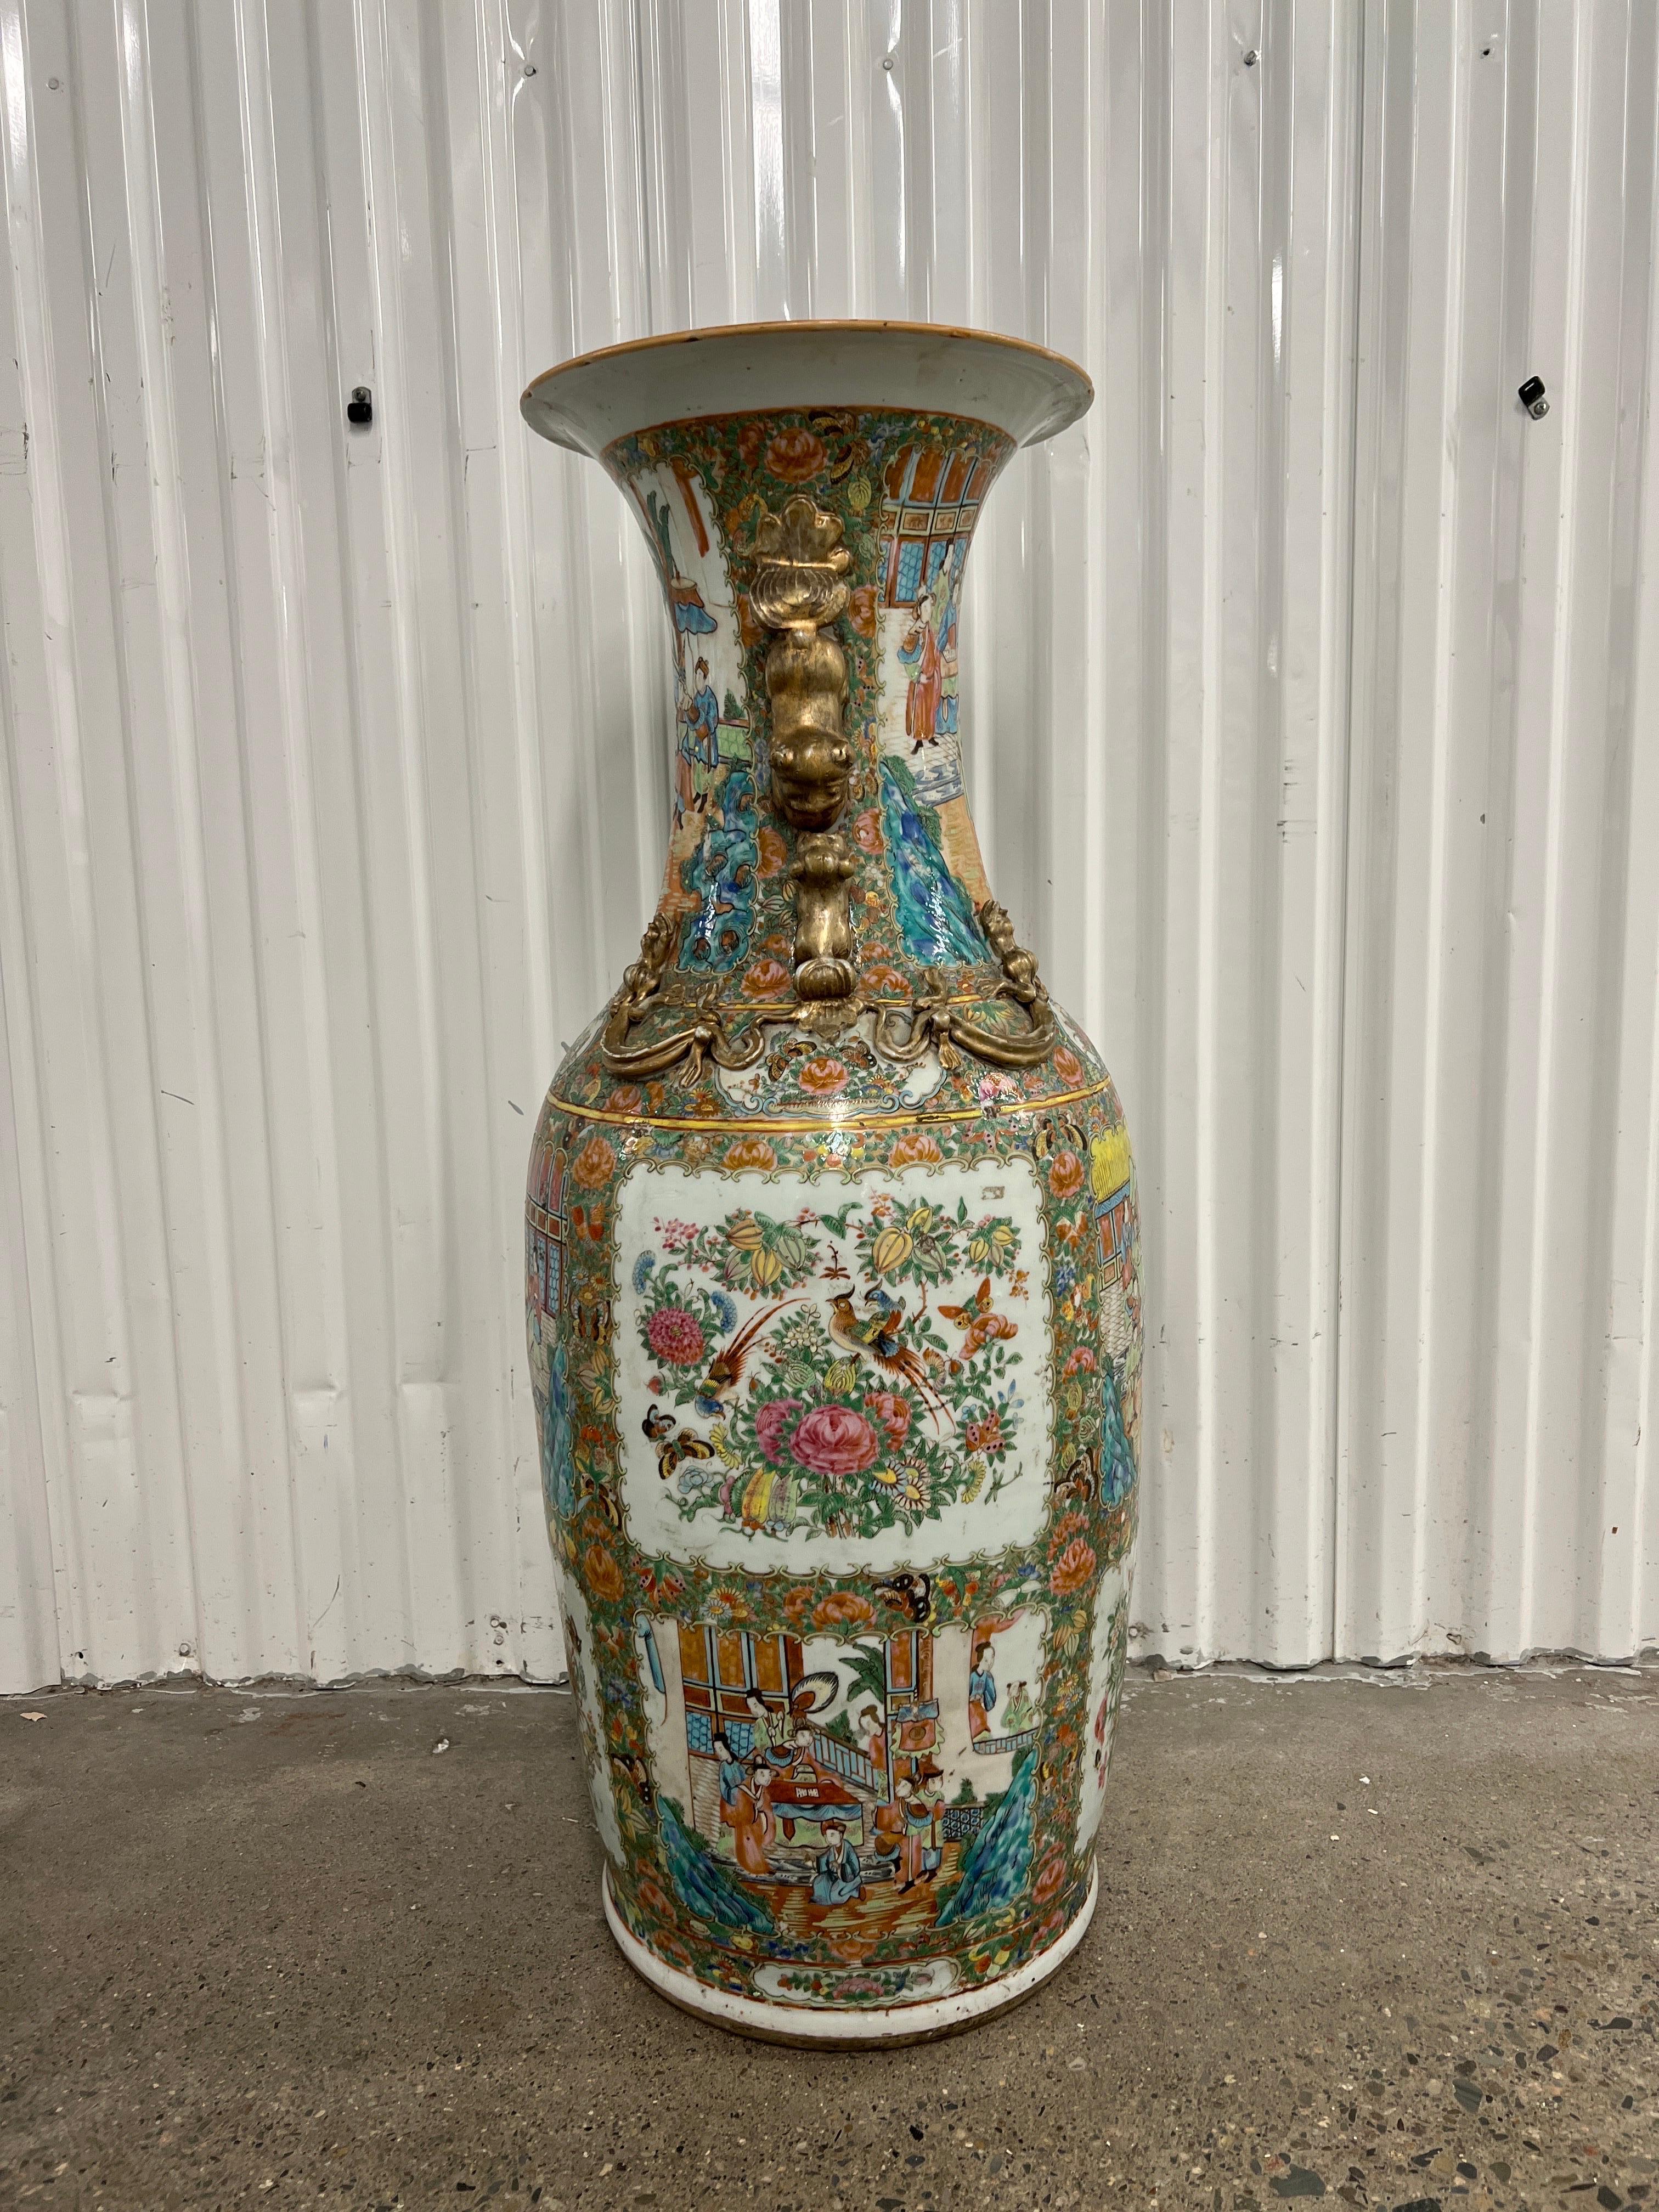 Chinese, late 19th century.

A palace size Rose Medallion floor vase. The vase is decorated with polychrome enameled surface, several figural scholar windows and gilt decorated foo dog handles. Unmarked to underside.